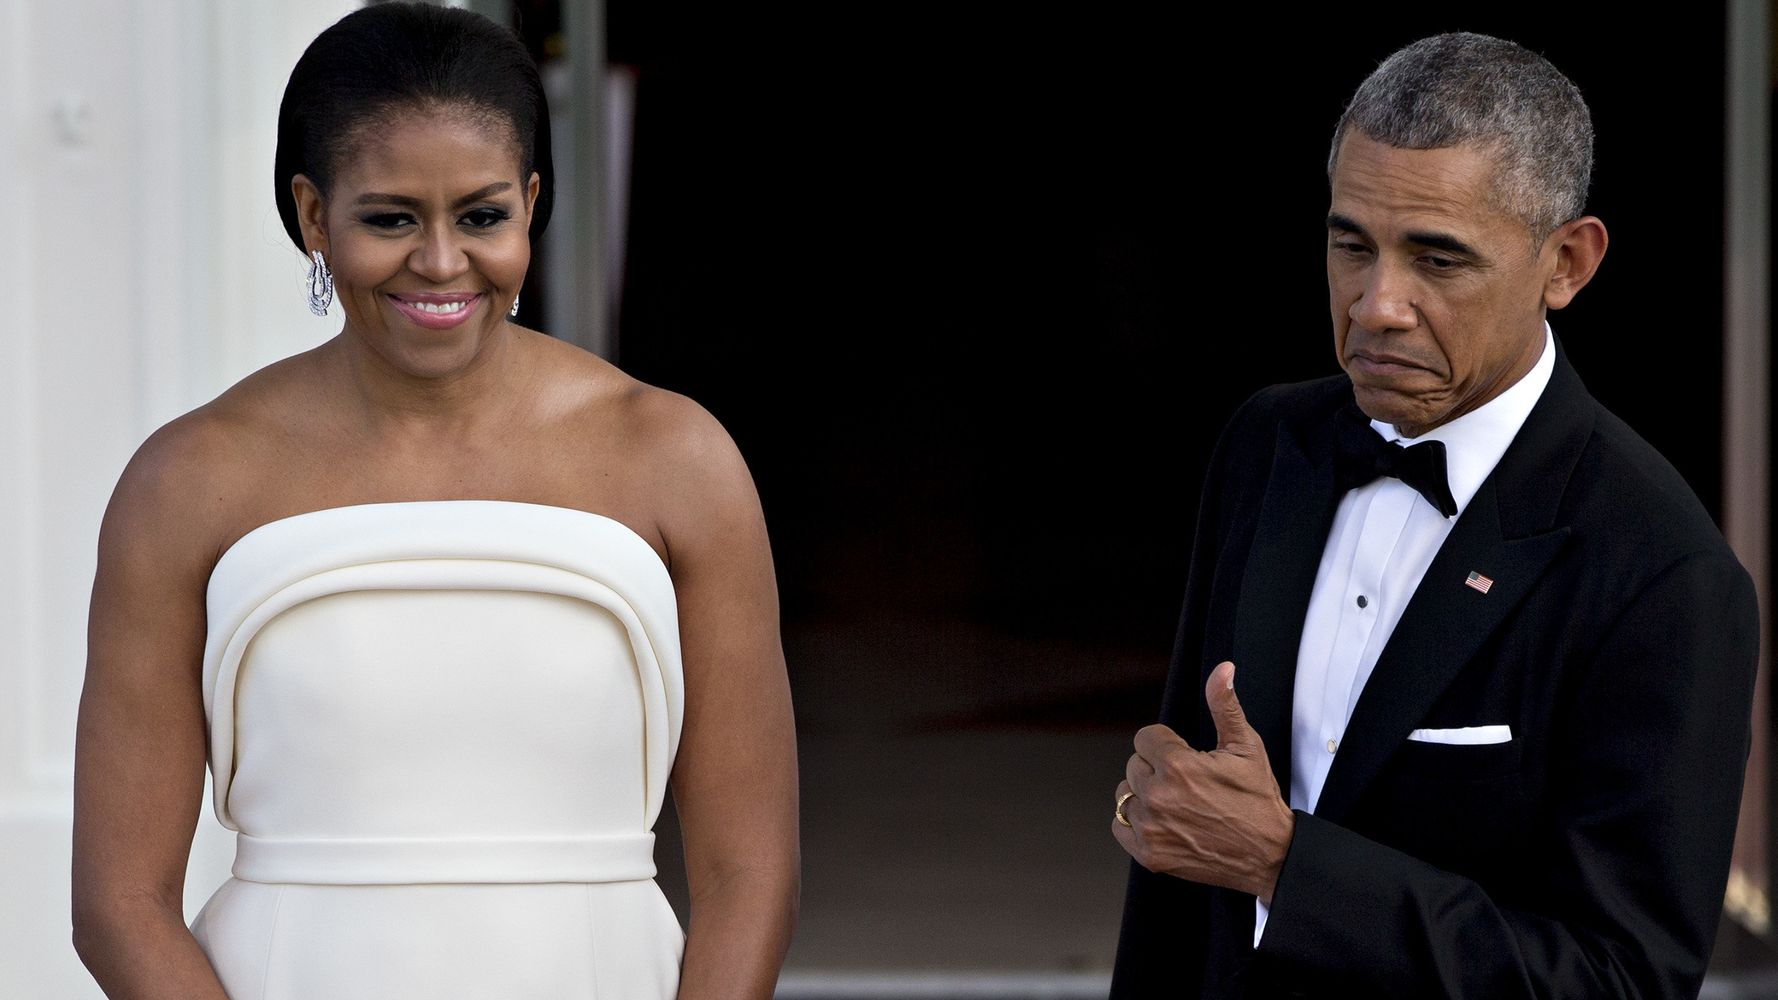 Michelle Obama's Stunning State Dinner Gown Gets A Big Thumbs Up From ...